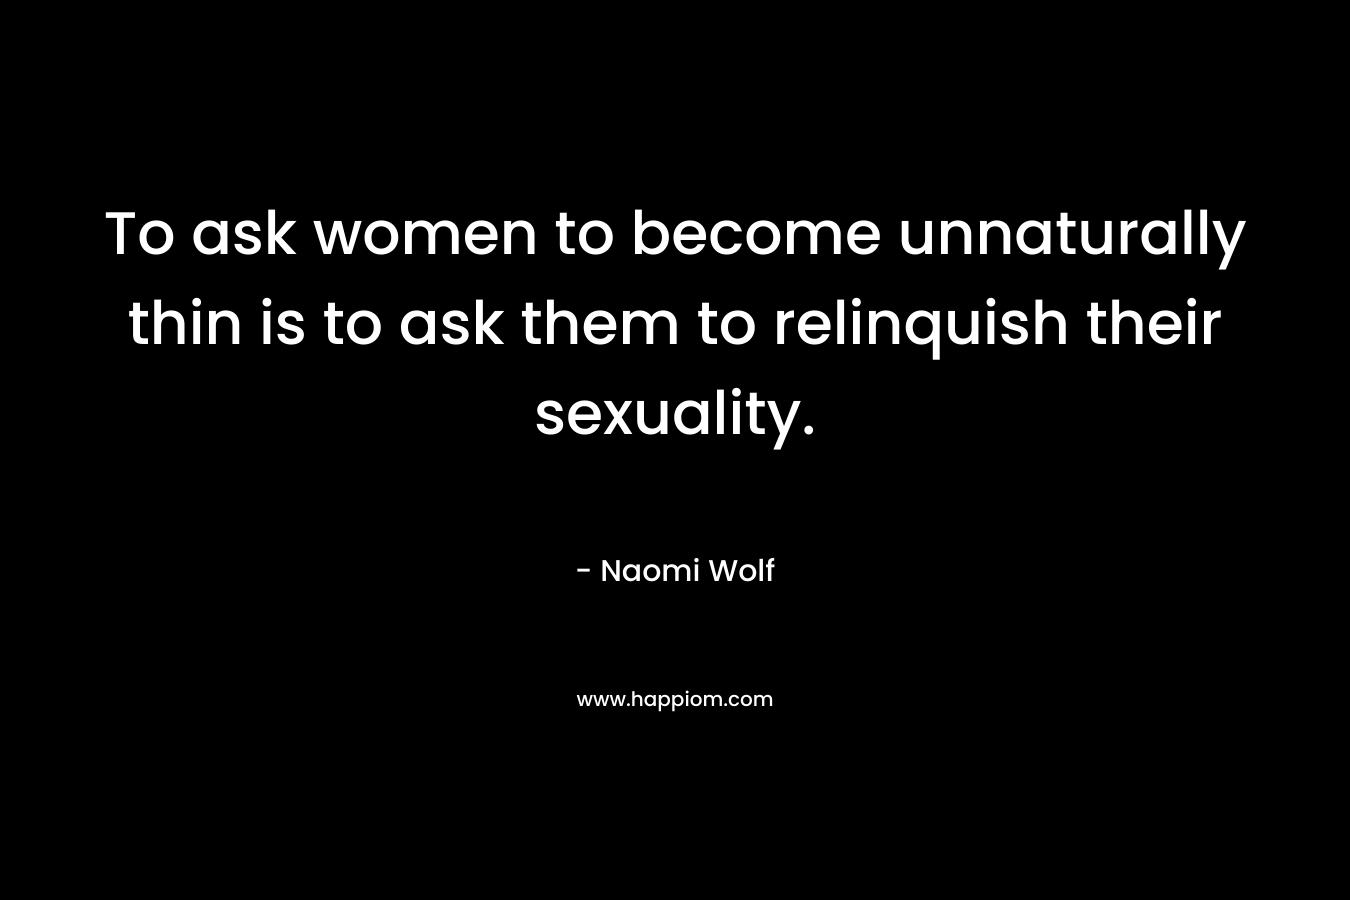 To ask women to become unnaturally thin is to ask them to relinquish their sexuality. – Naomi Wolf